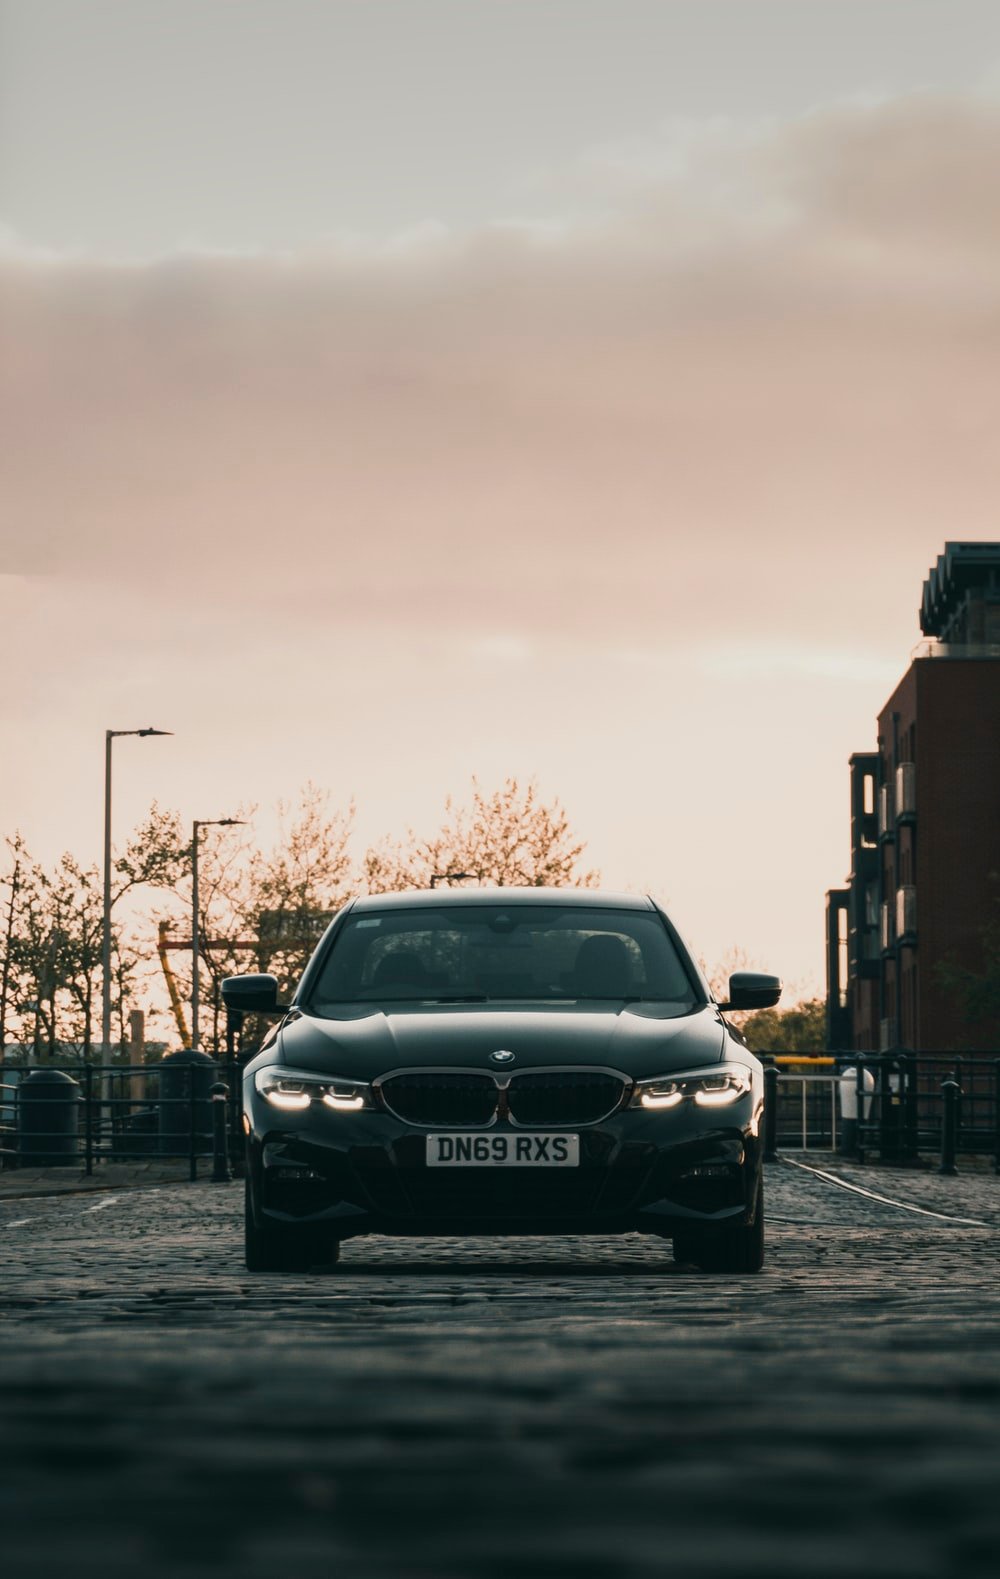 Bmw 3 Series Picture. Download Free Image